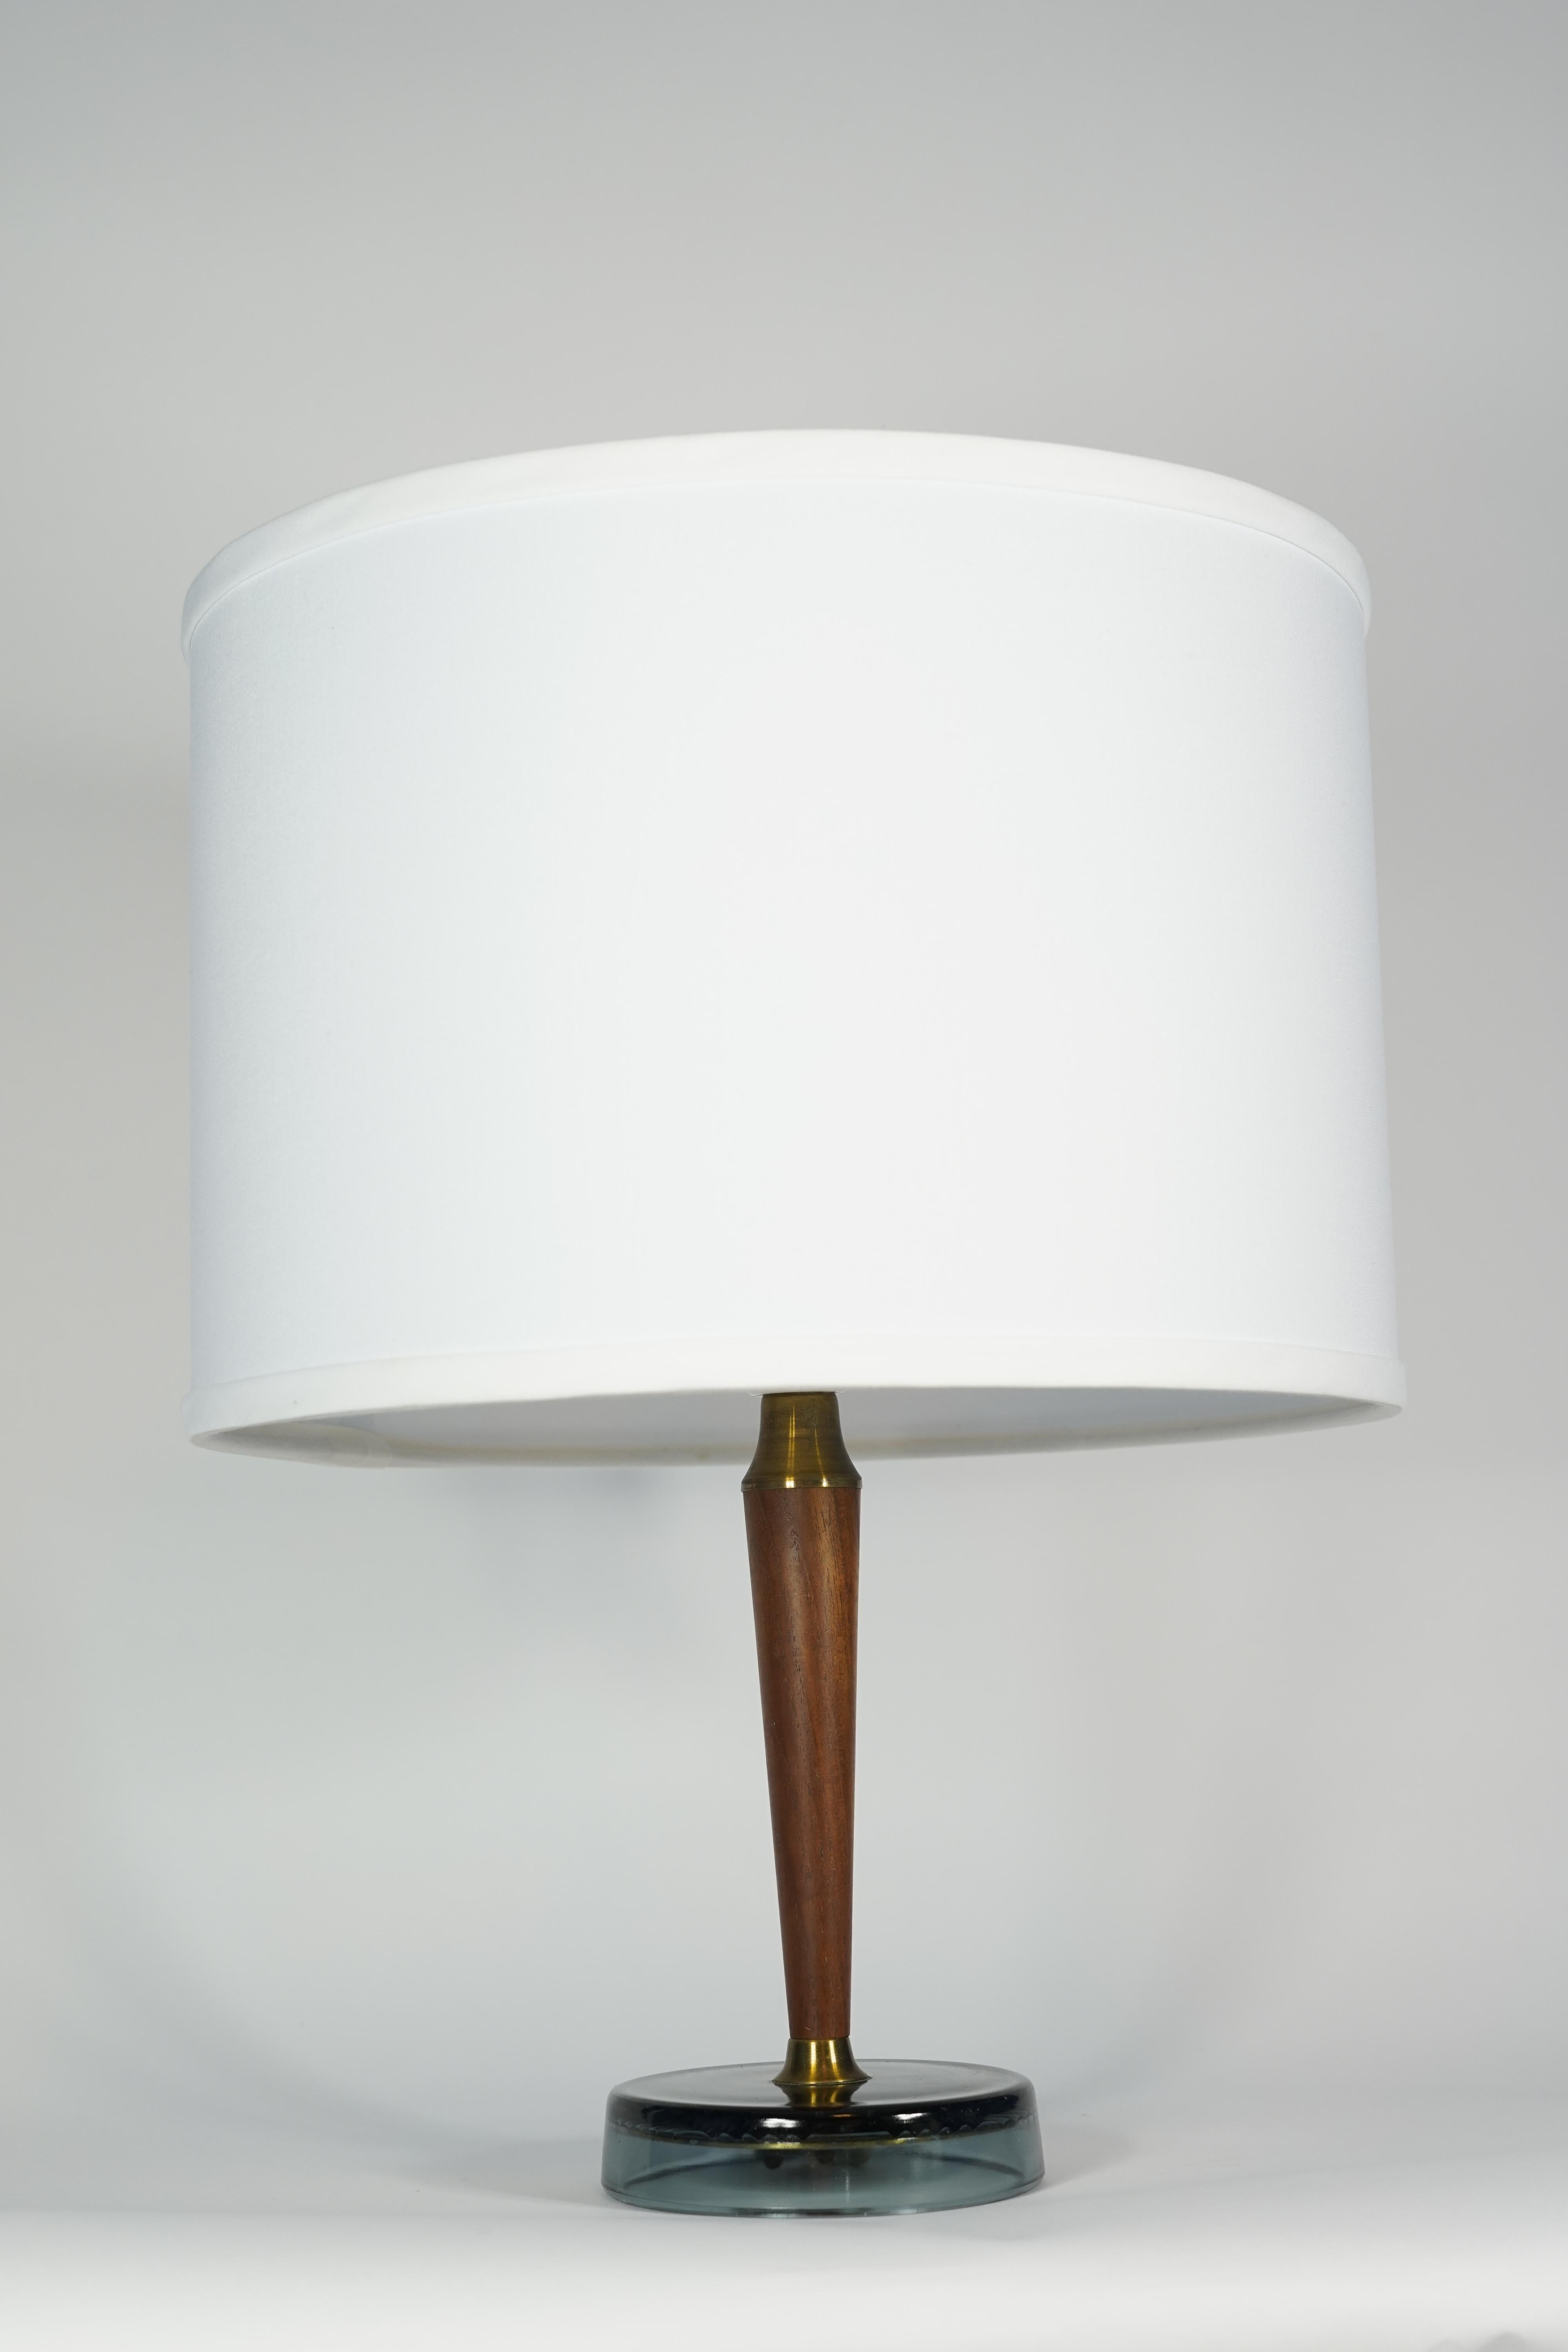 Midcentury Teak/Brass and Glass Lamp, Sweden, 1950 For Sale 1